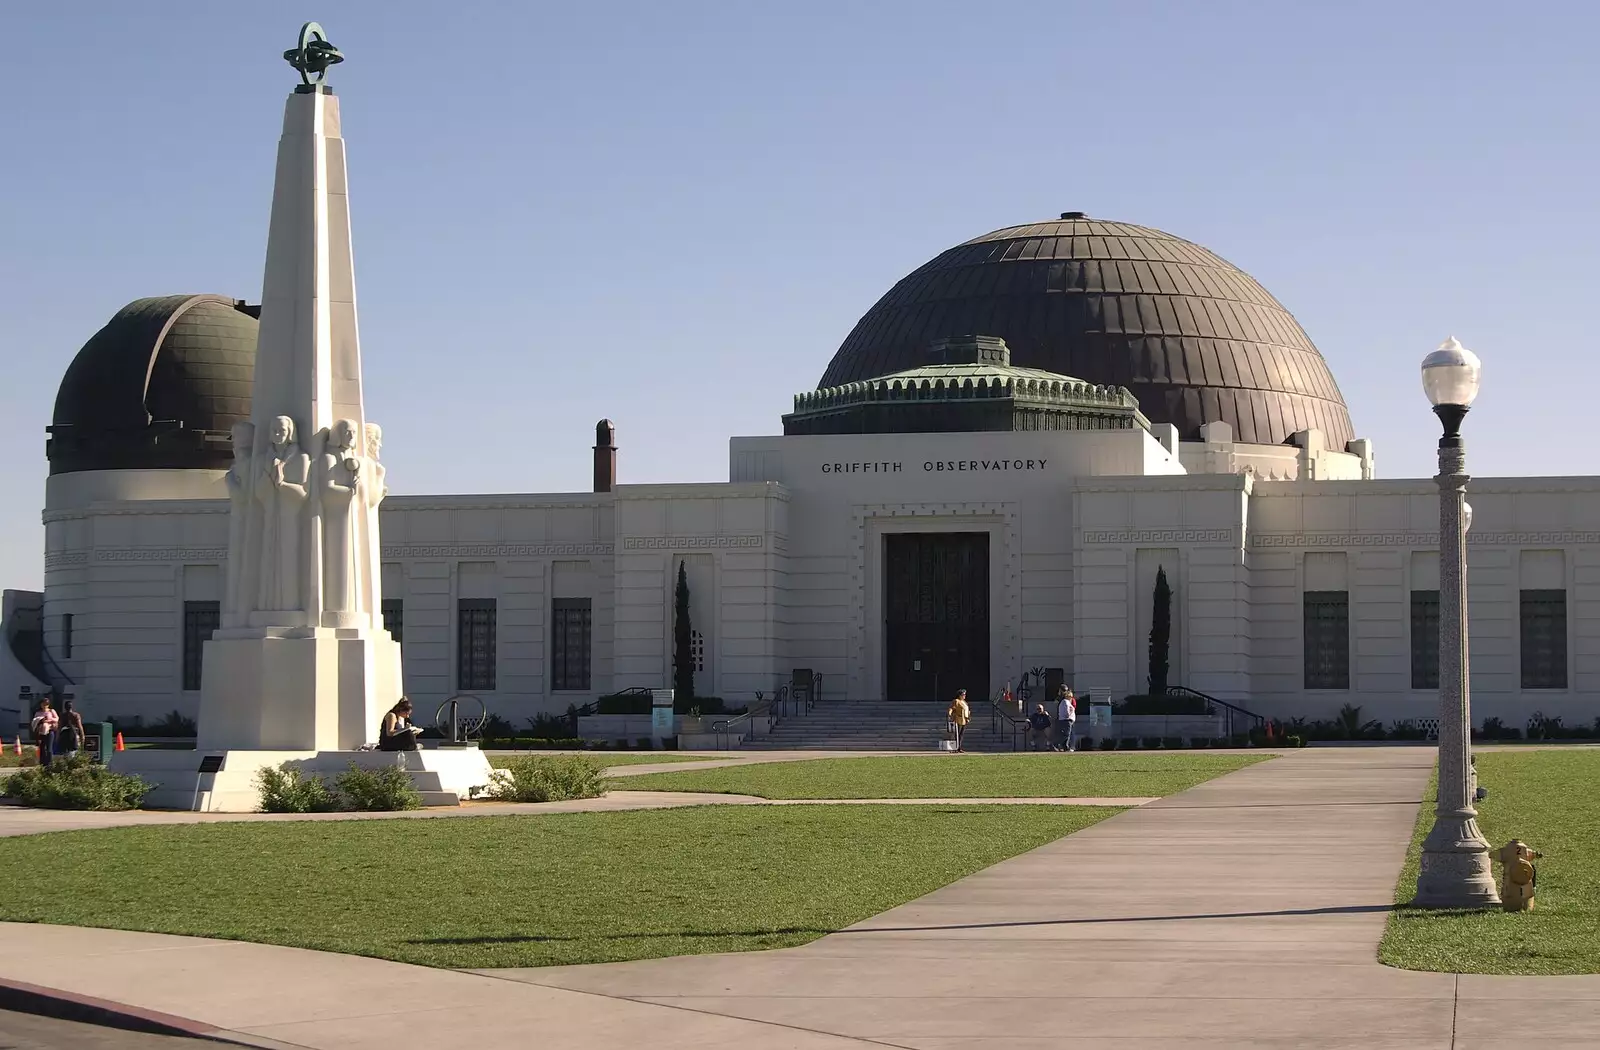 The Griffith Observatory, from San Diego and Hollywood, California, US - 3rd March 2008